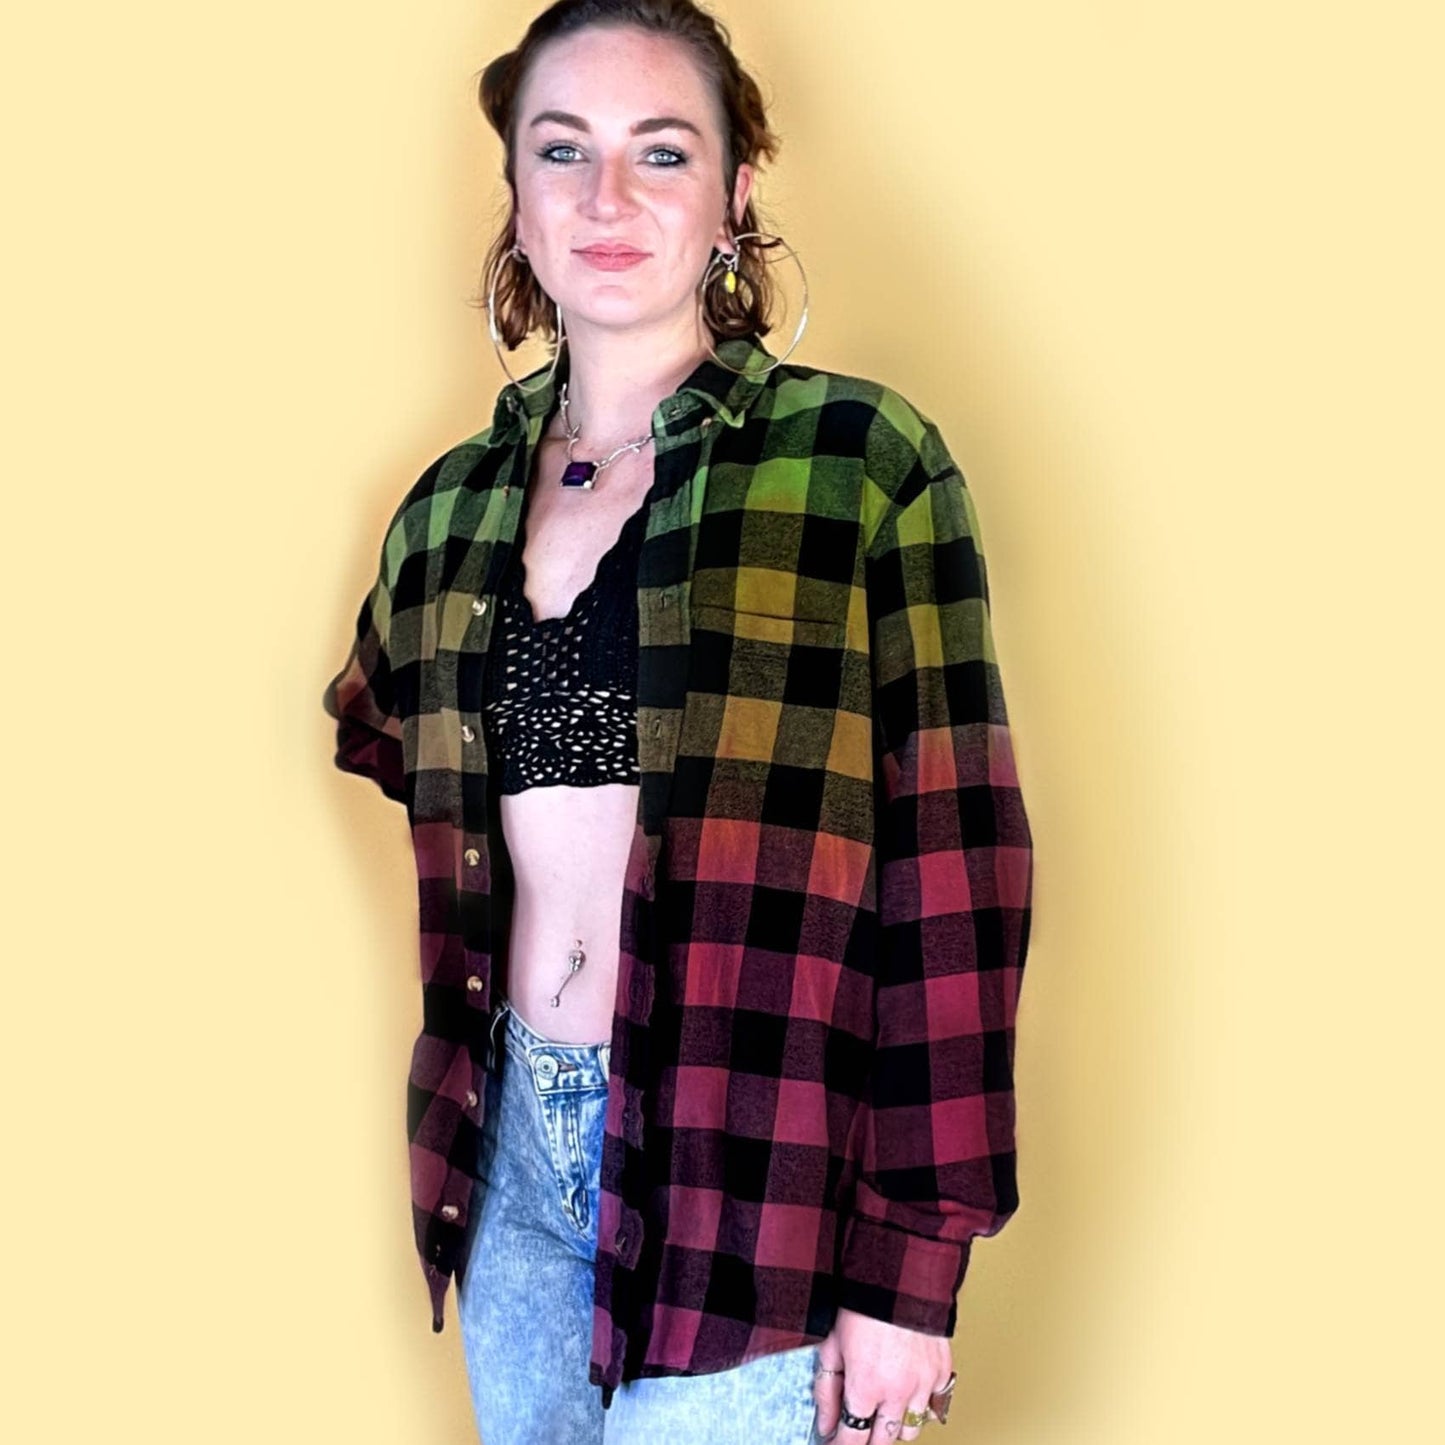 Oversized Grunge Punk Hippie Earth Tone Rasta Tie Dye Flannel Shirt. Dip Dye Gradient Plaid Shirt for men and women. Handmade with quality fiber reactive dyes for vibrant color that lasts.100% Cotton Soft Flannel Fabric, Collar Neckline,  Button Closure, Long Sleeves, front pocket, Machine washable